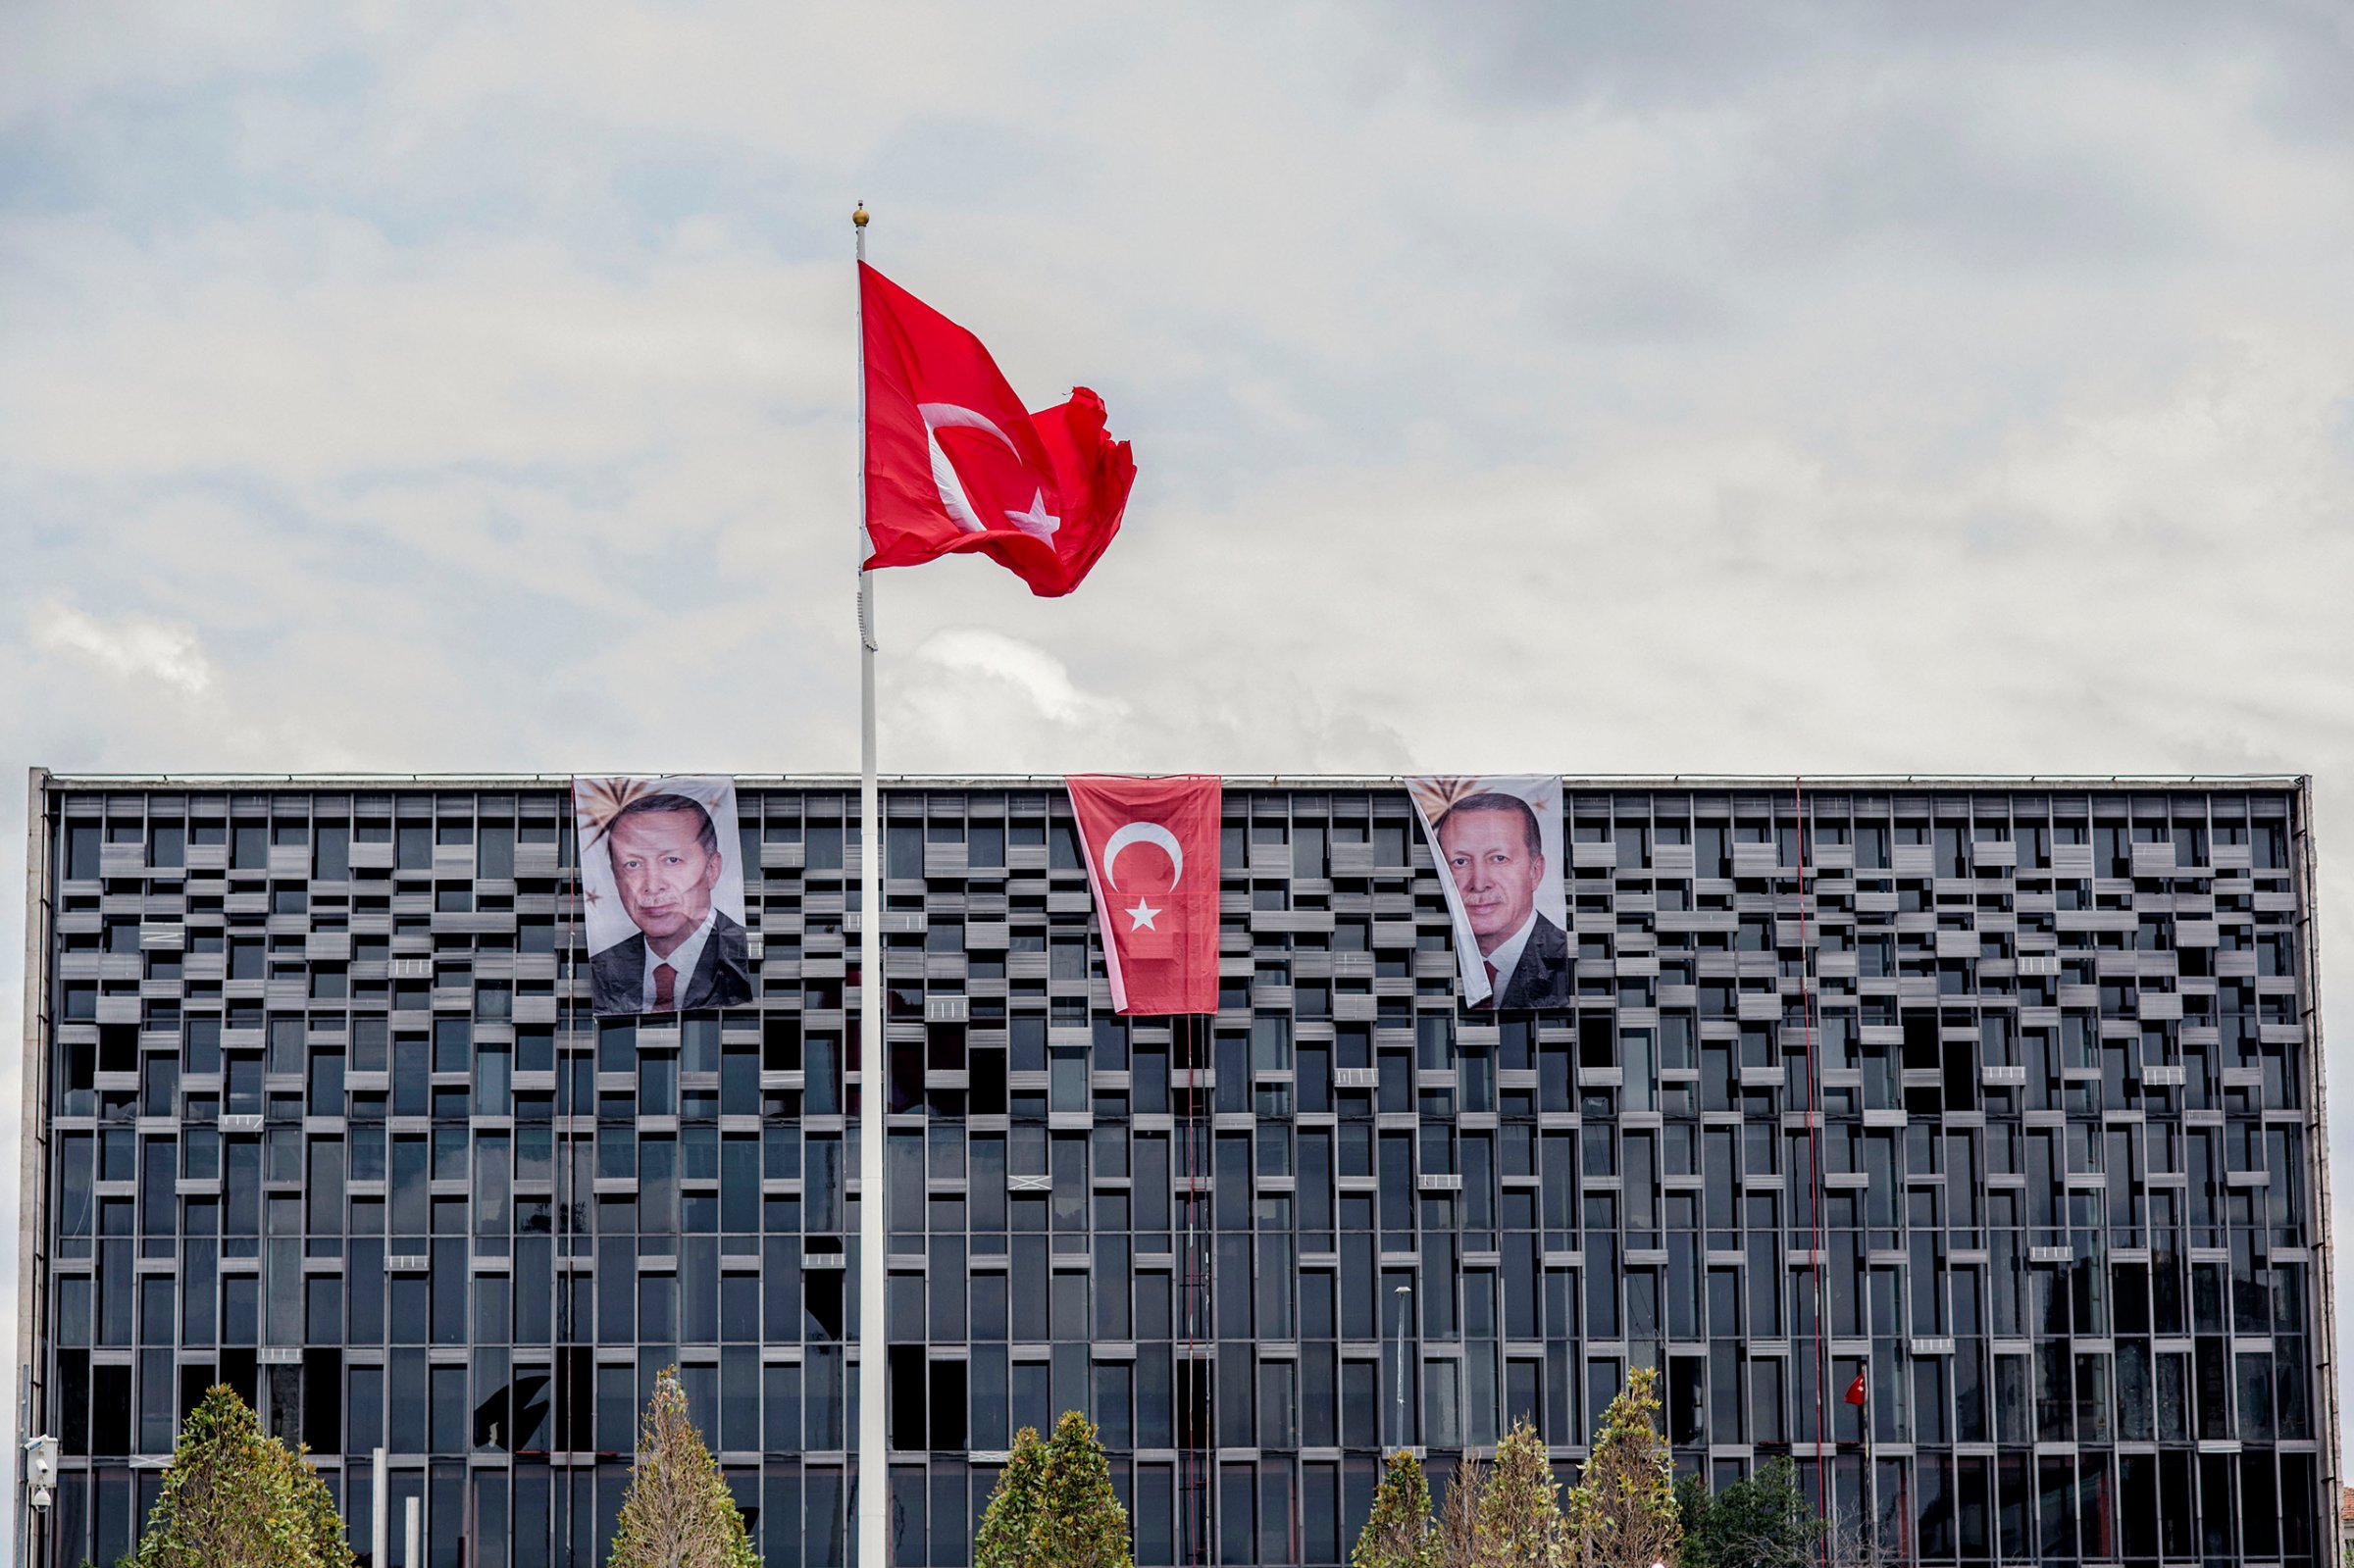 Banners with photographs of President Recep Tayyip Erdogan hang from the roof of a commercial building alongside the national flag in Istanbul, Turkey, on July 18, 2016.